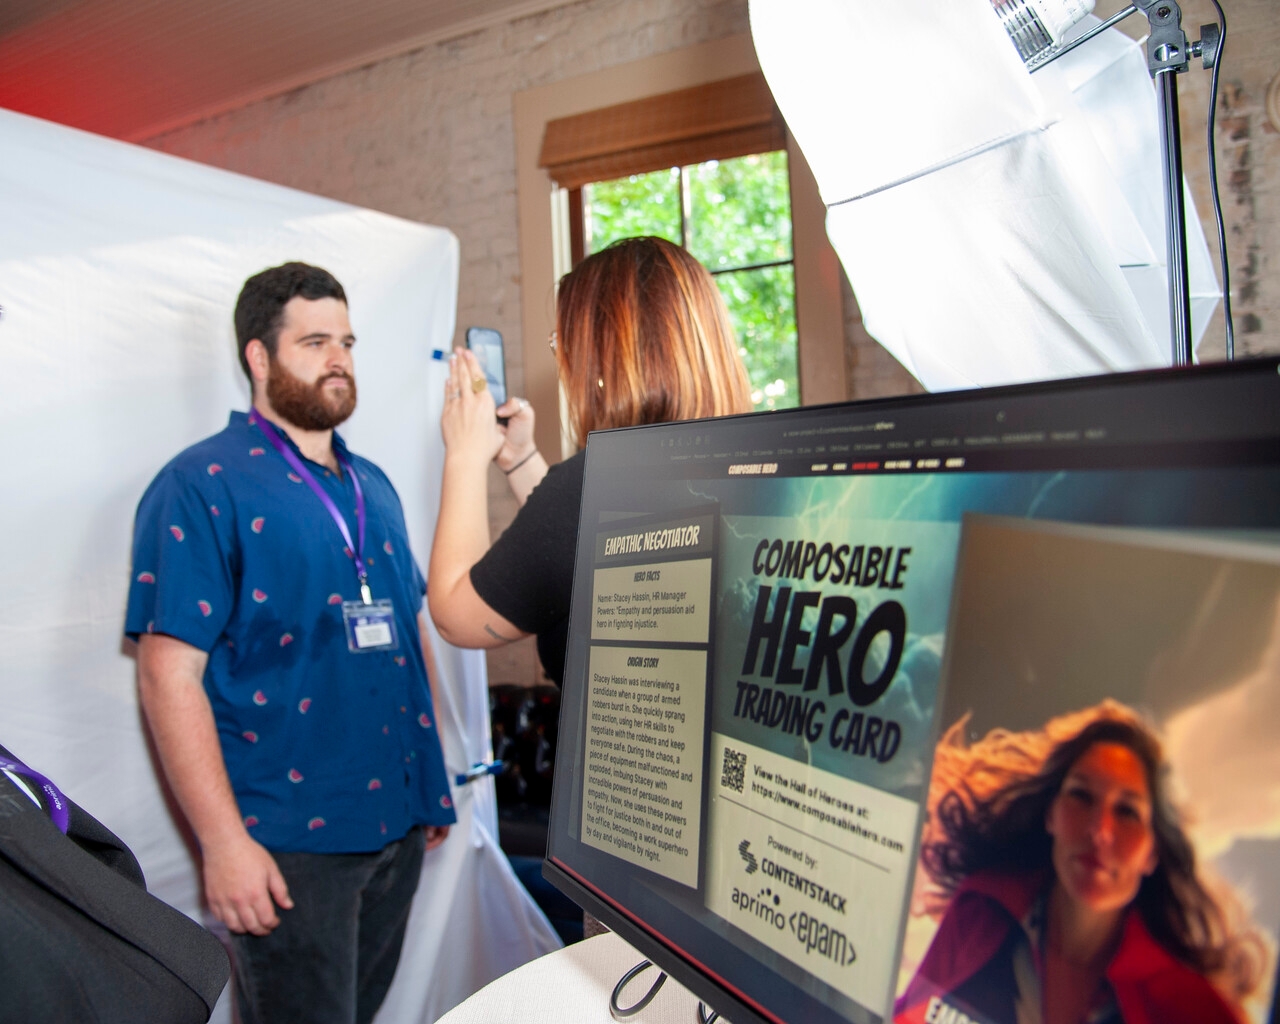 A team member snaps a photo of an SXSW attendee for his Composable Hero trading card.